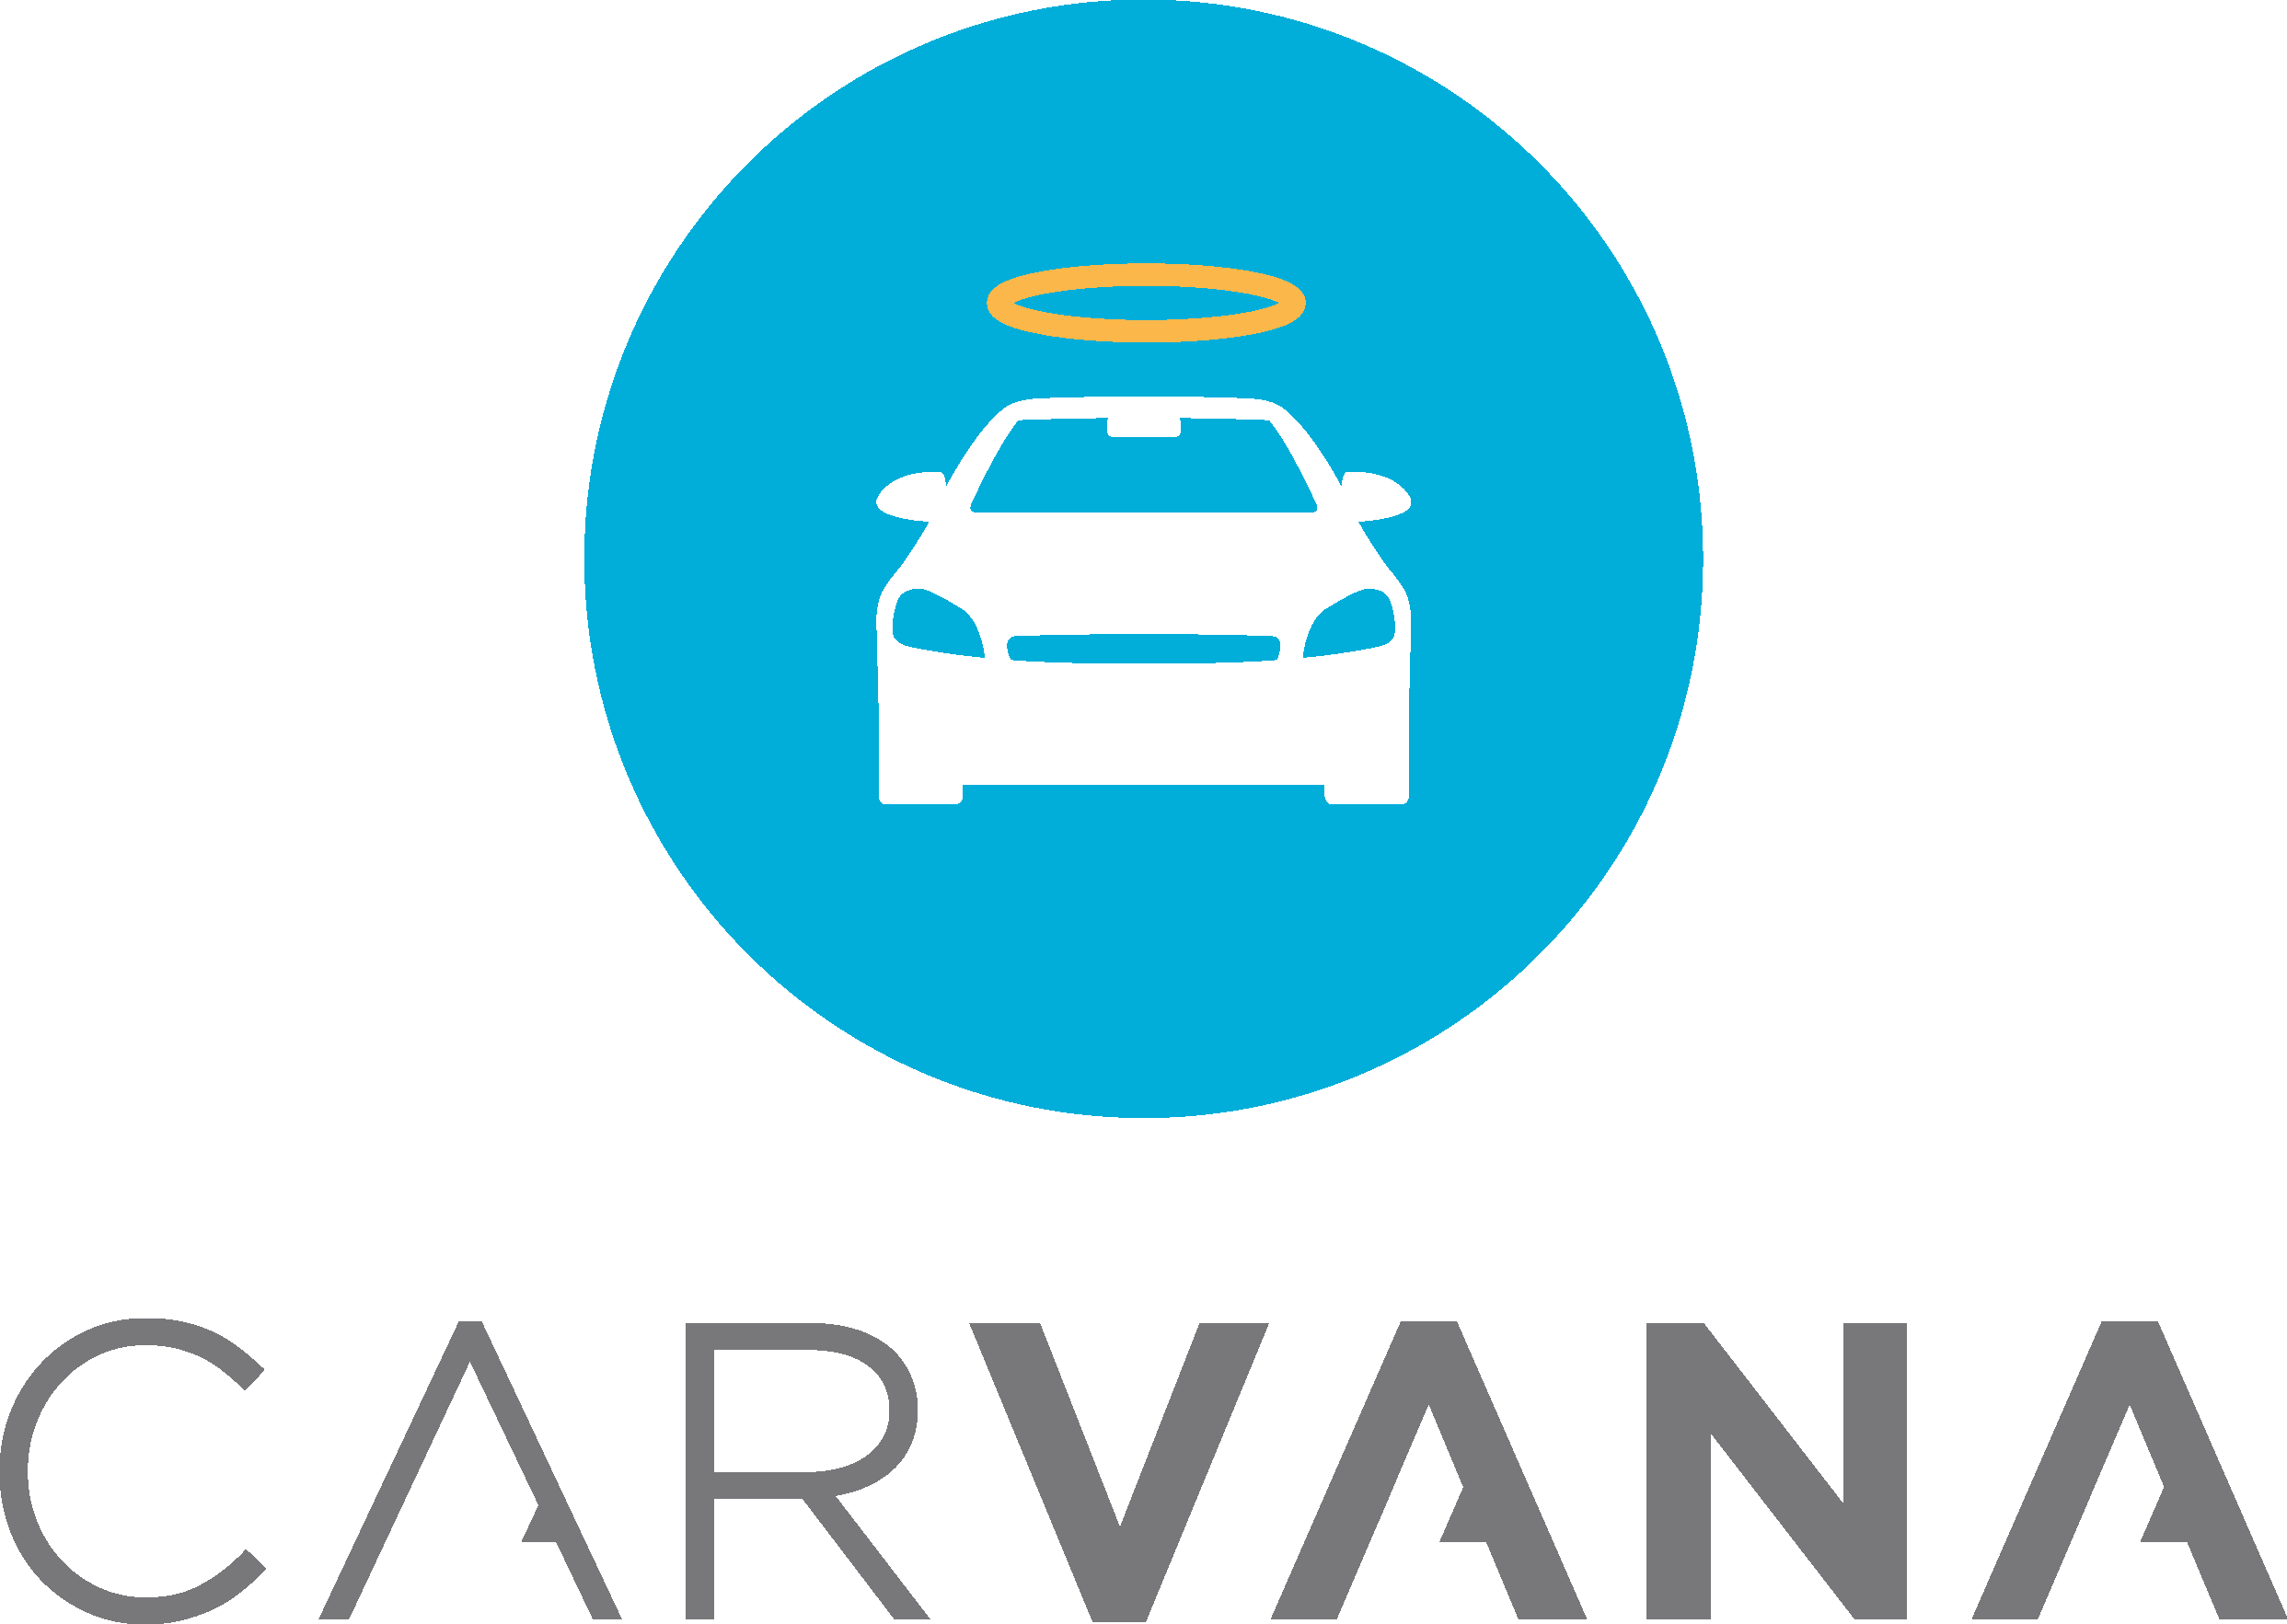 View more on Carvana